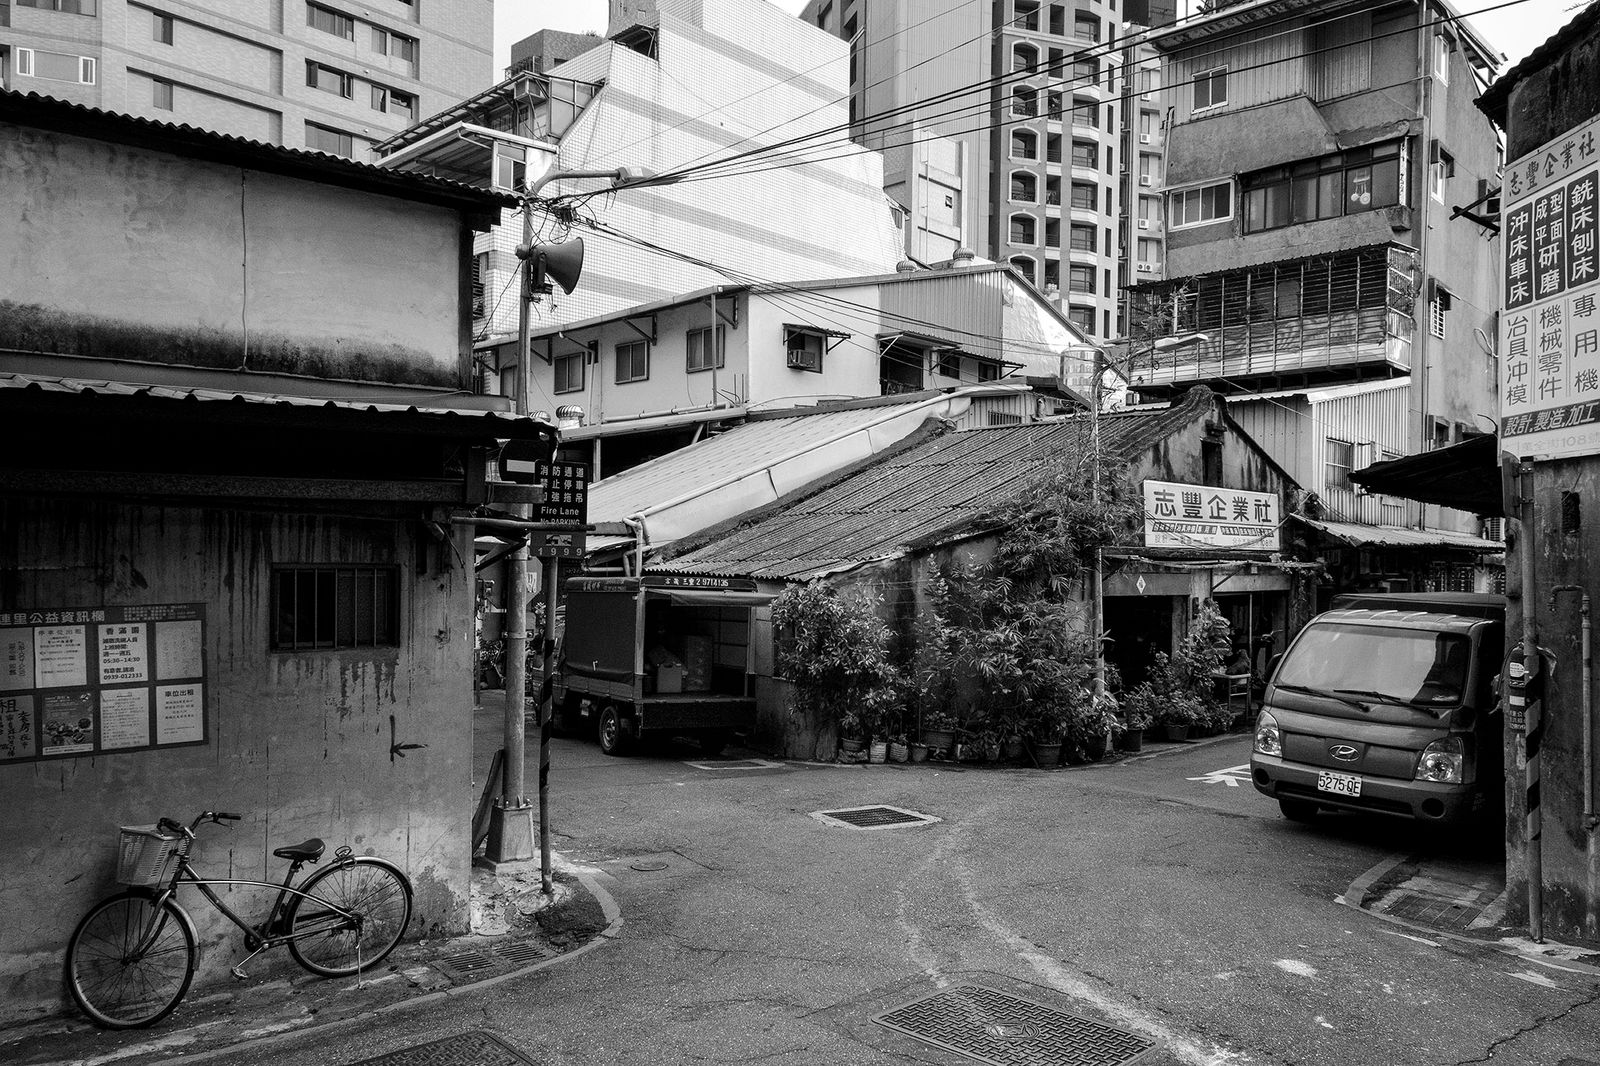 © Yun-Hsiang LIAO - Image from the Daytime and Nearest neighbor photography project